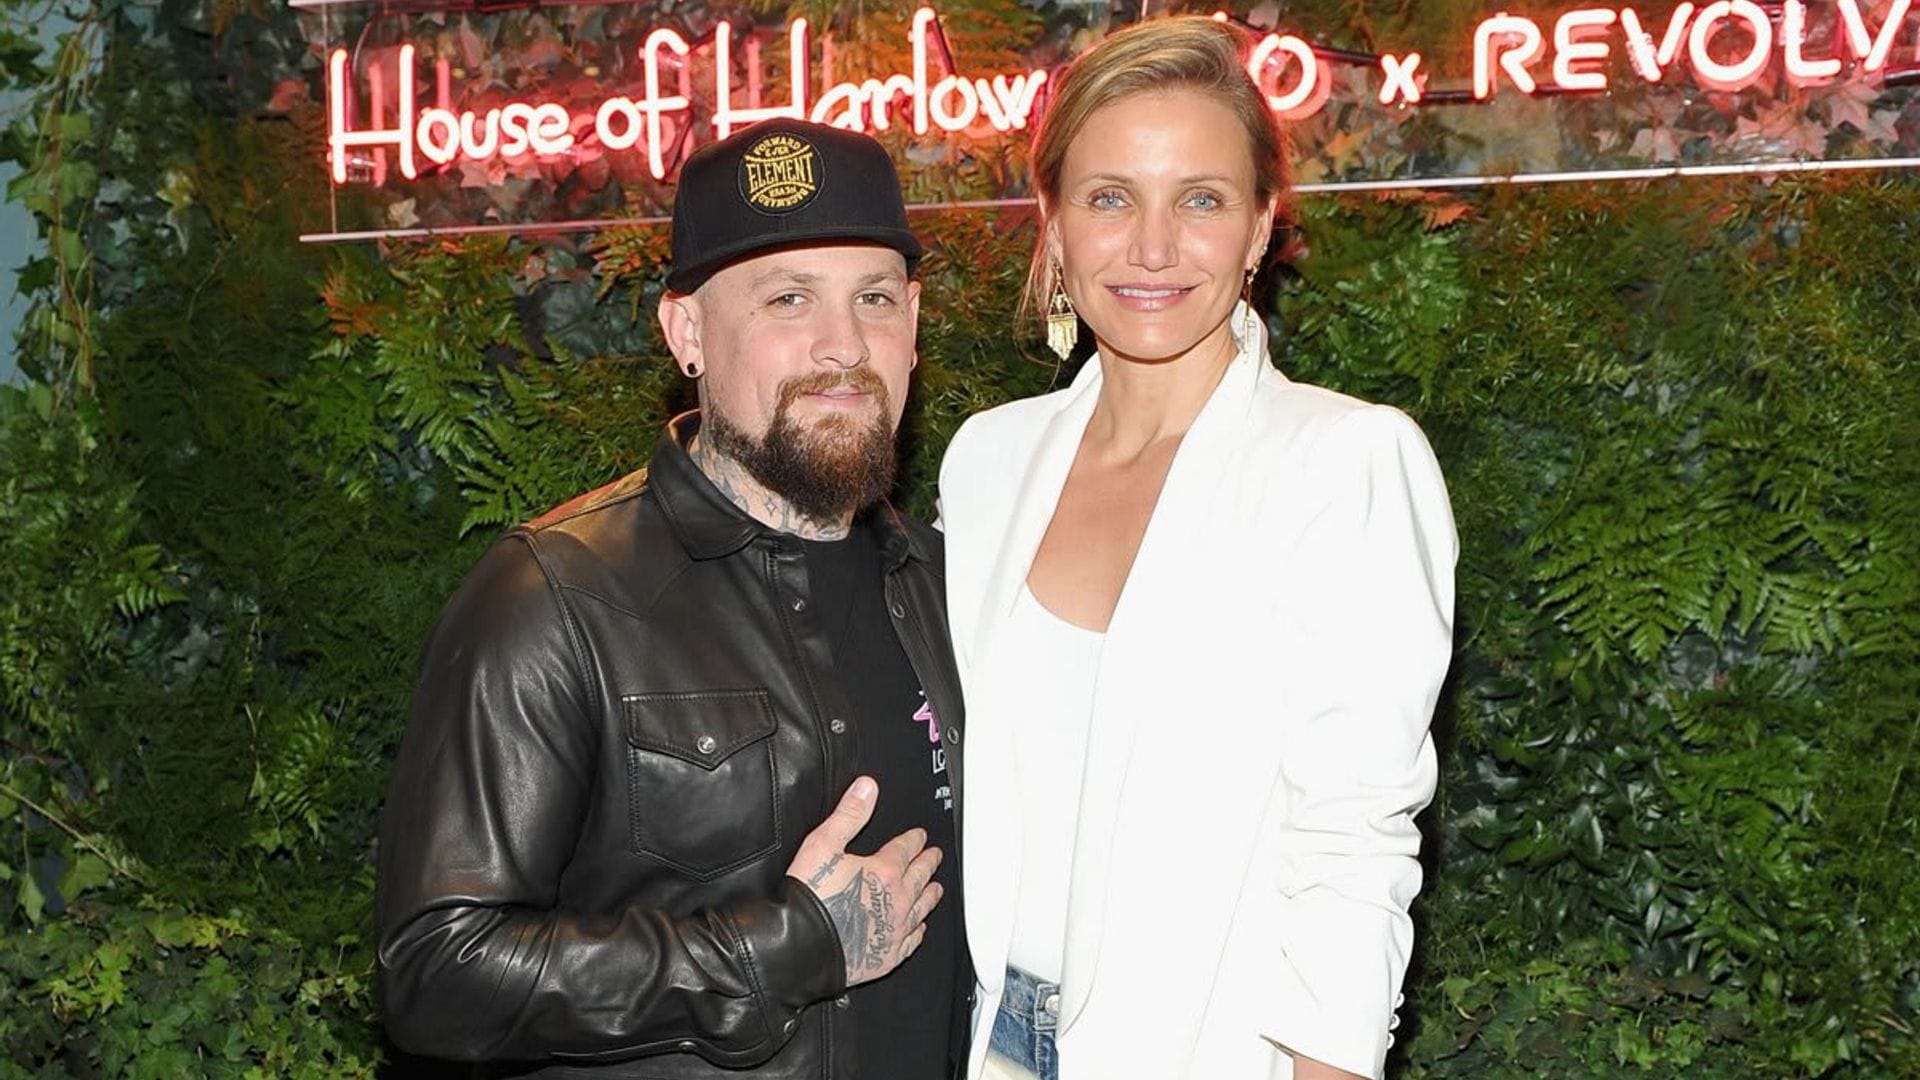 Cameron Diaz says she and Benji Madden are a ‘total tag-team’ when it comes to parenting